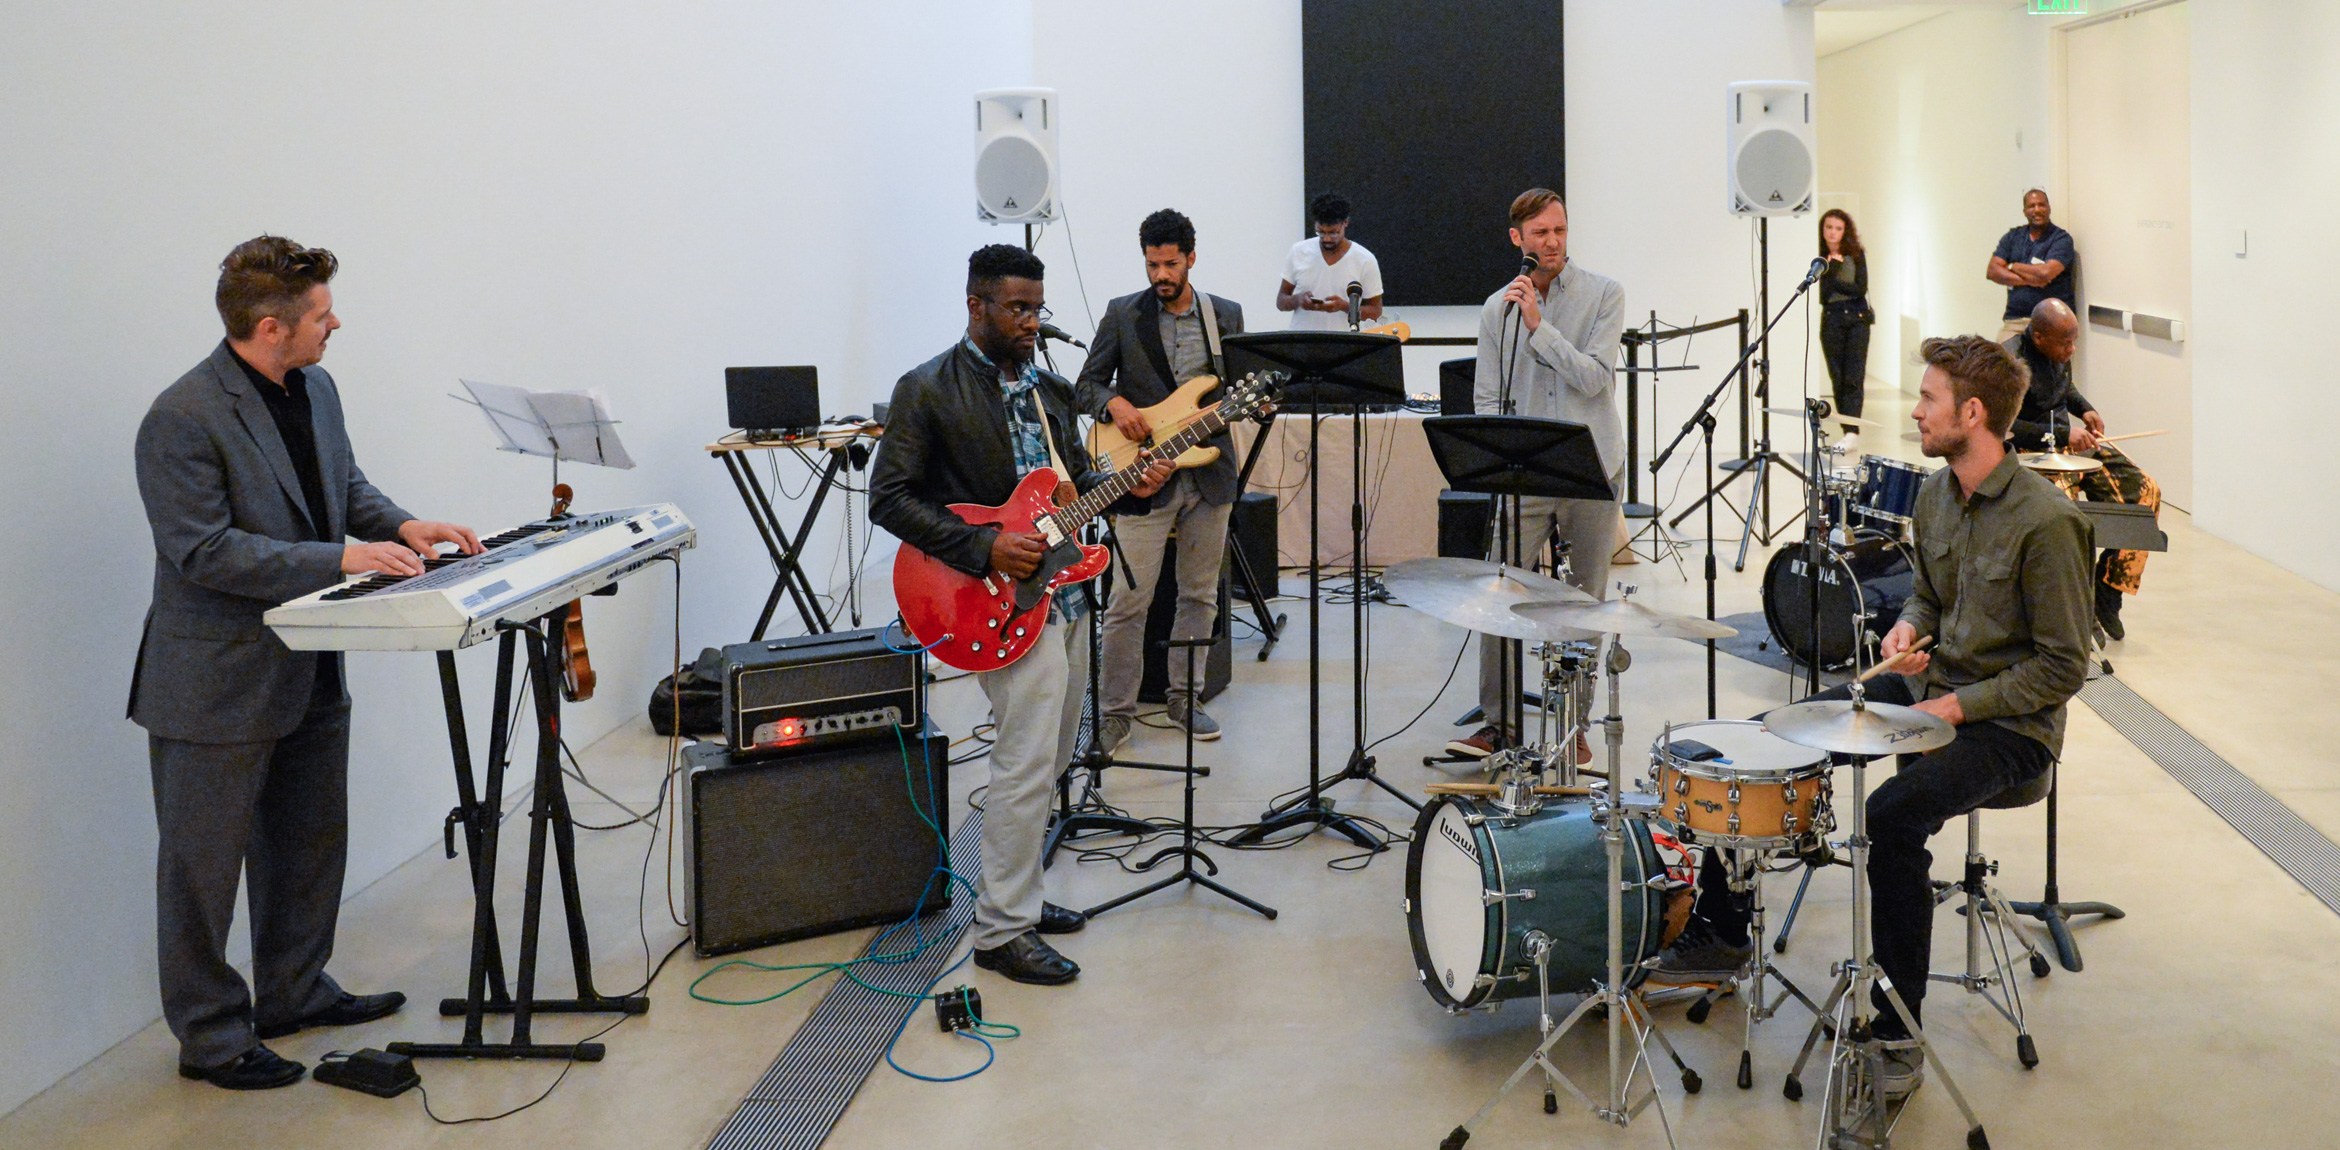 A large band performing in front of Ellsworth Kelly's "Blue Black".